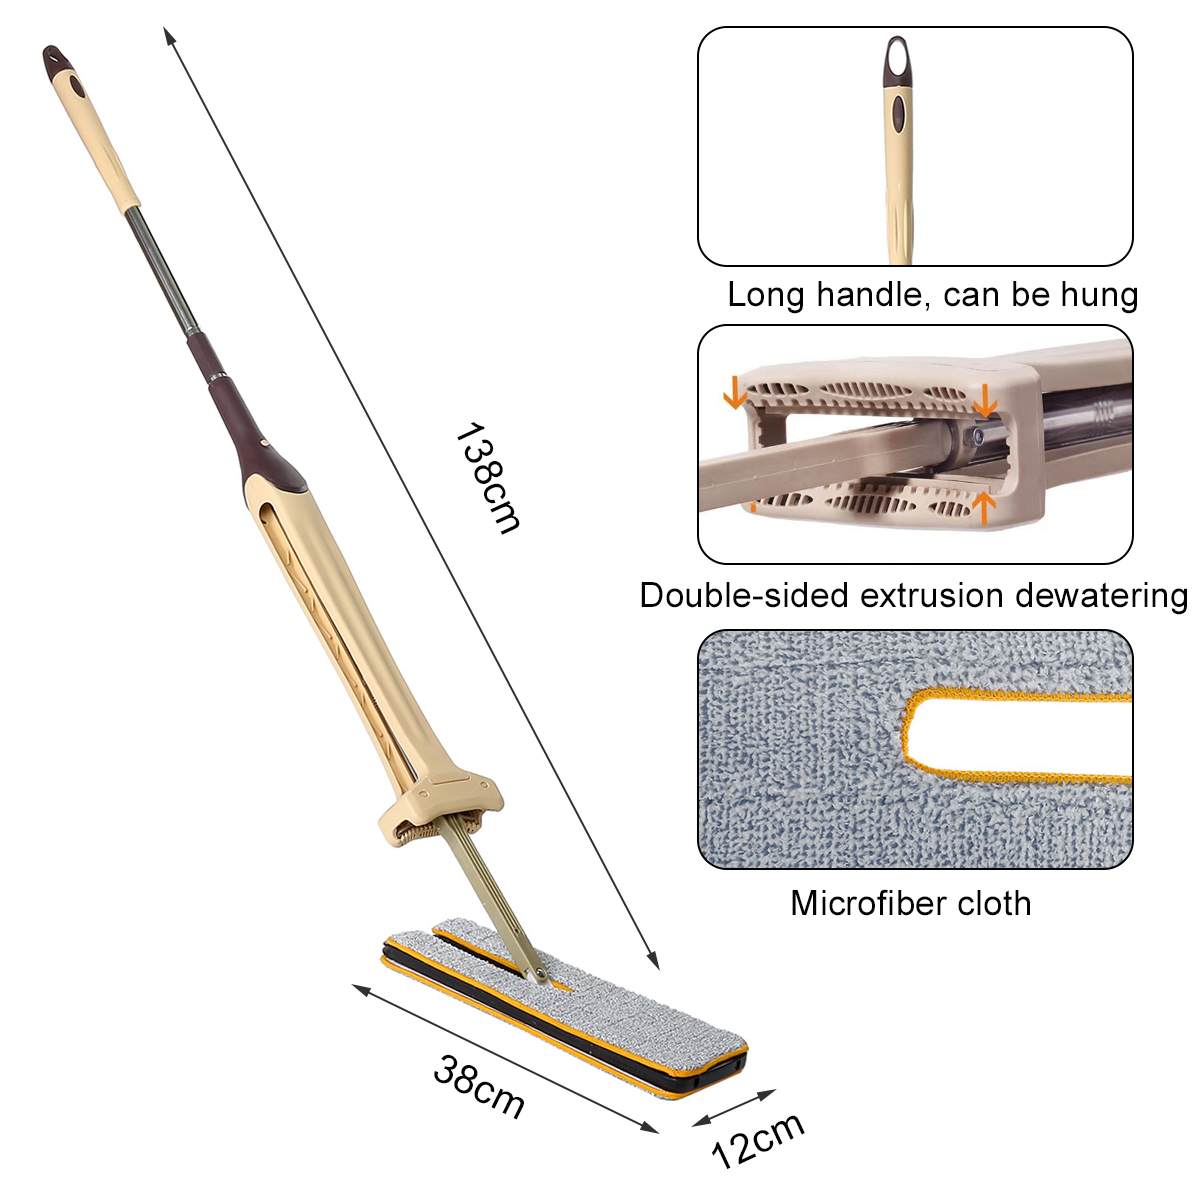 Double-sided Telescopic Mop+2/4PCS Lazy Flat Mop Flat Mops Wood Floor Mops Dust Push Mops Home Cleaning Tools